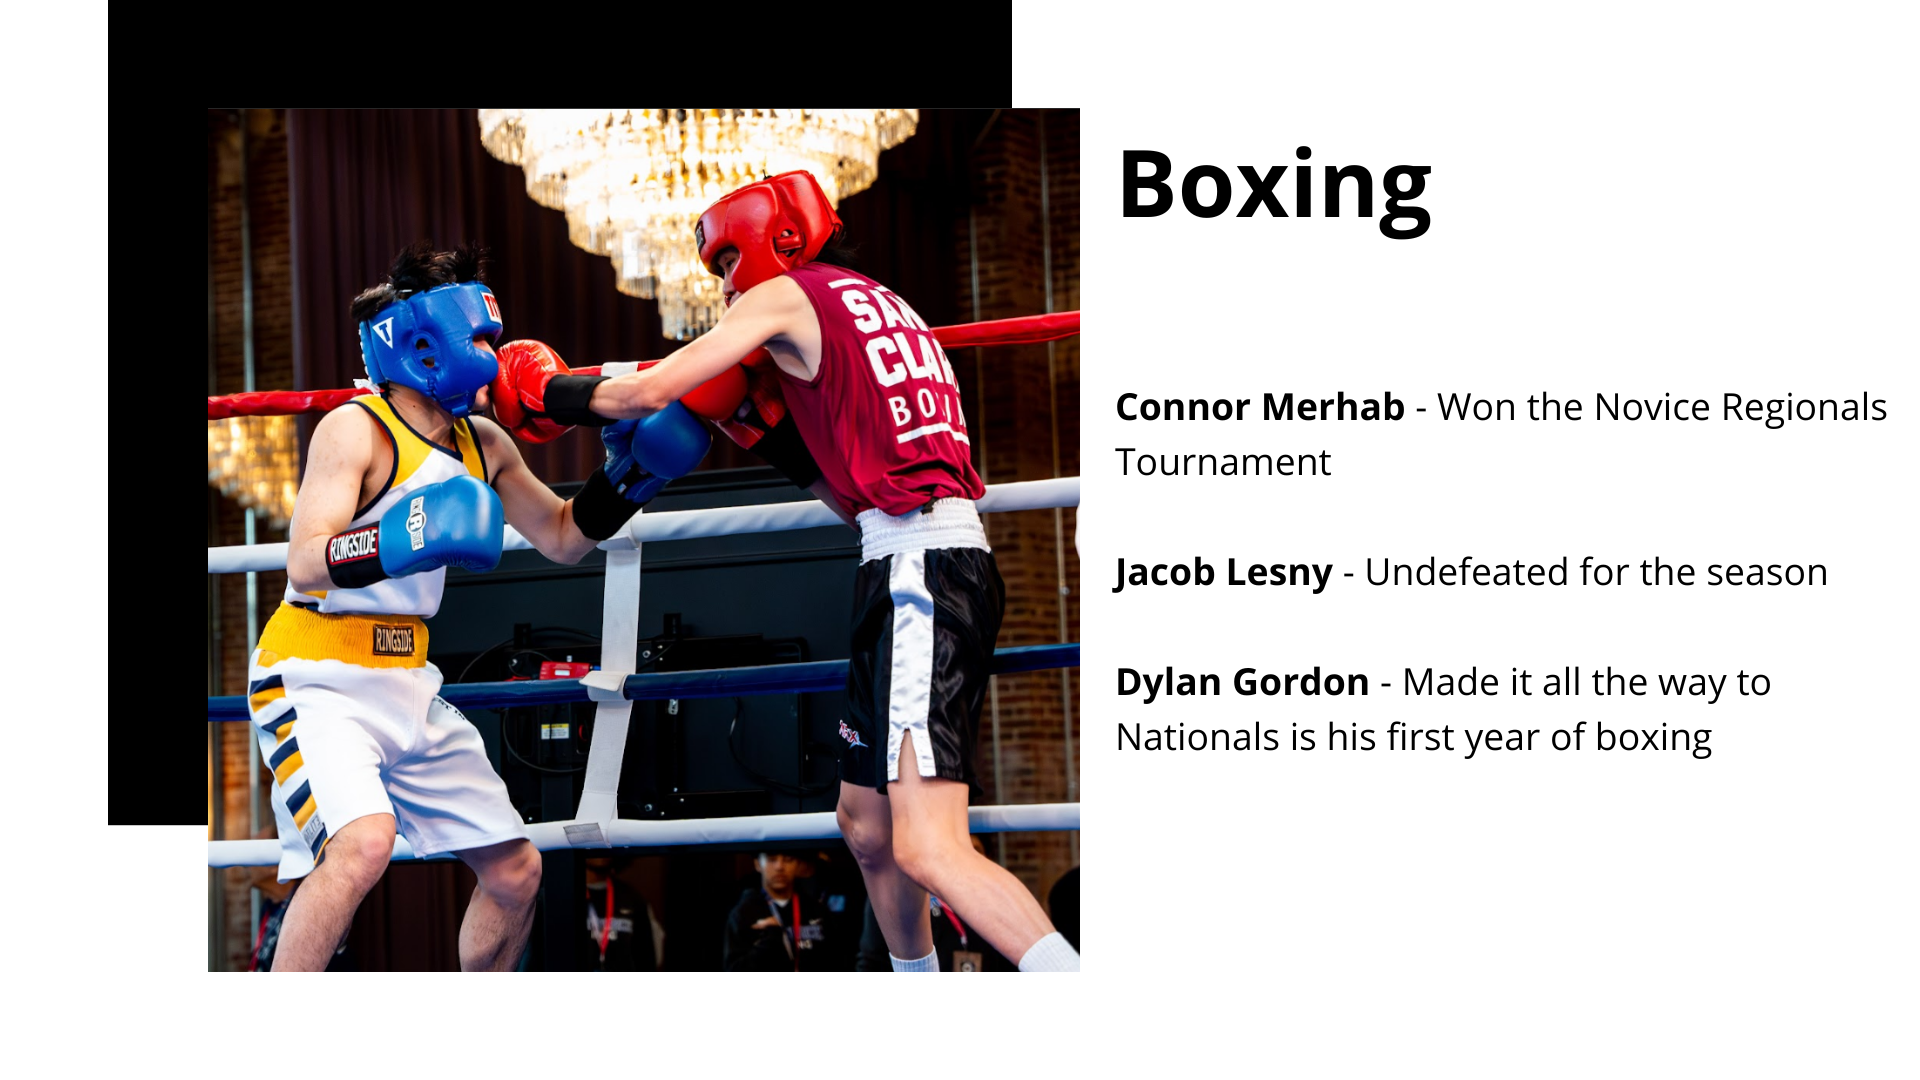 Shows a picture on the left of a student boxing. On the right states: Connor Merhab                             Jacob Lesny  Dylan Gordon  Won the Novice Regionals Tournament  Undefeated for the season  Made it all the way to Nationals is his first year of boxing